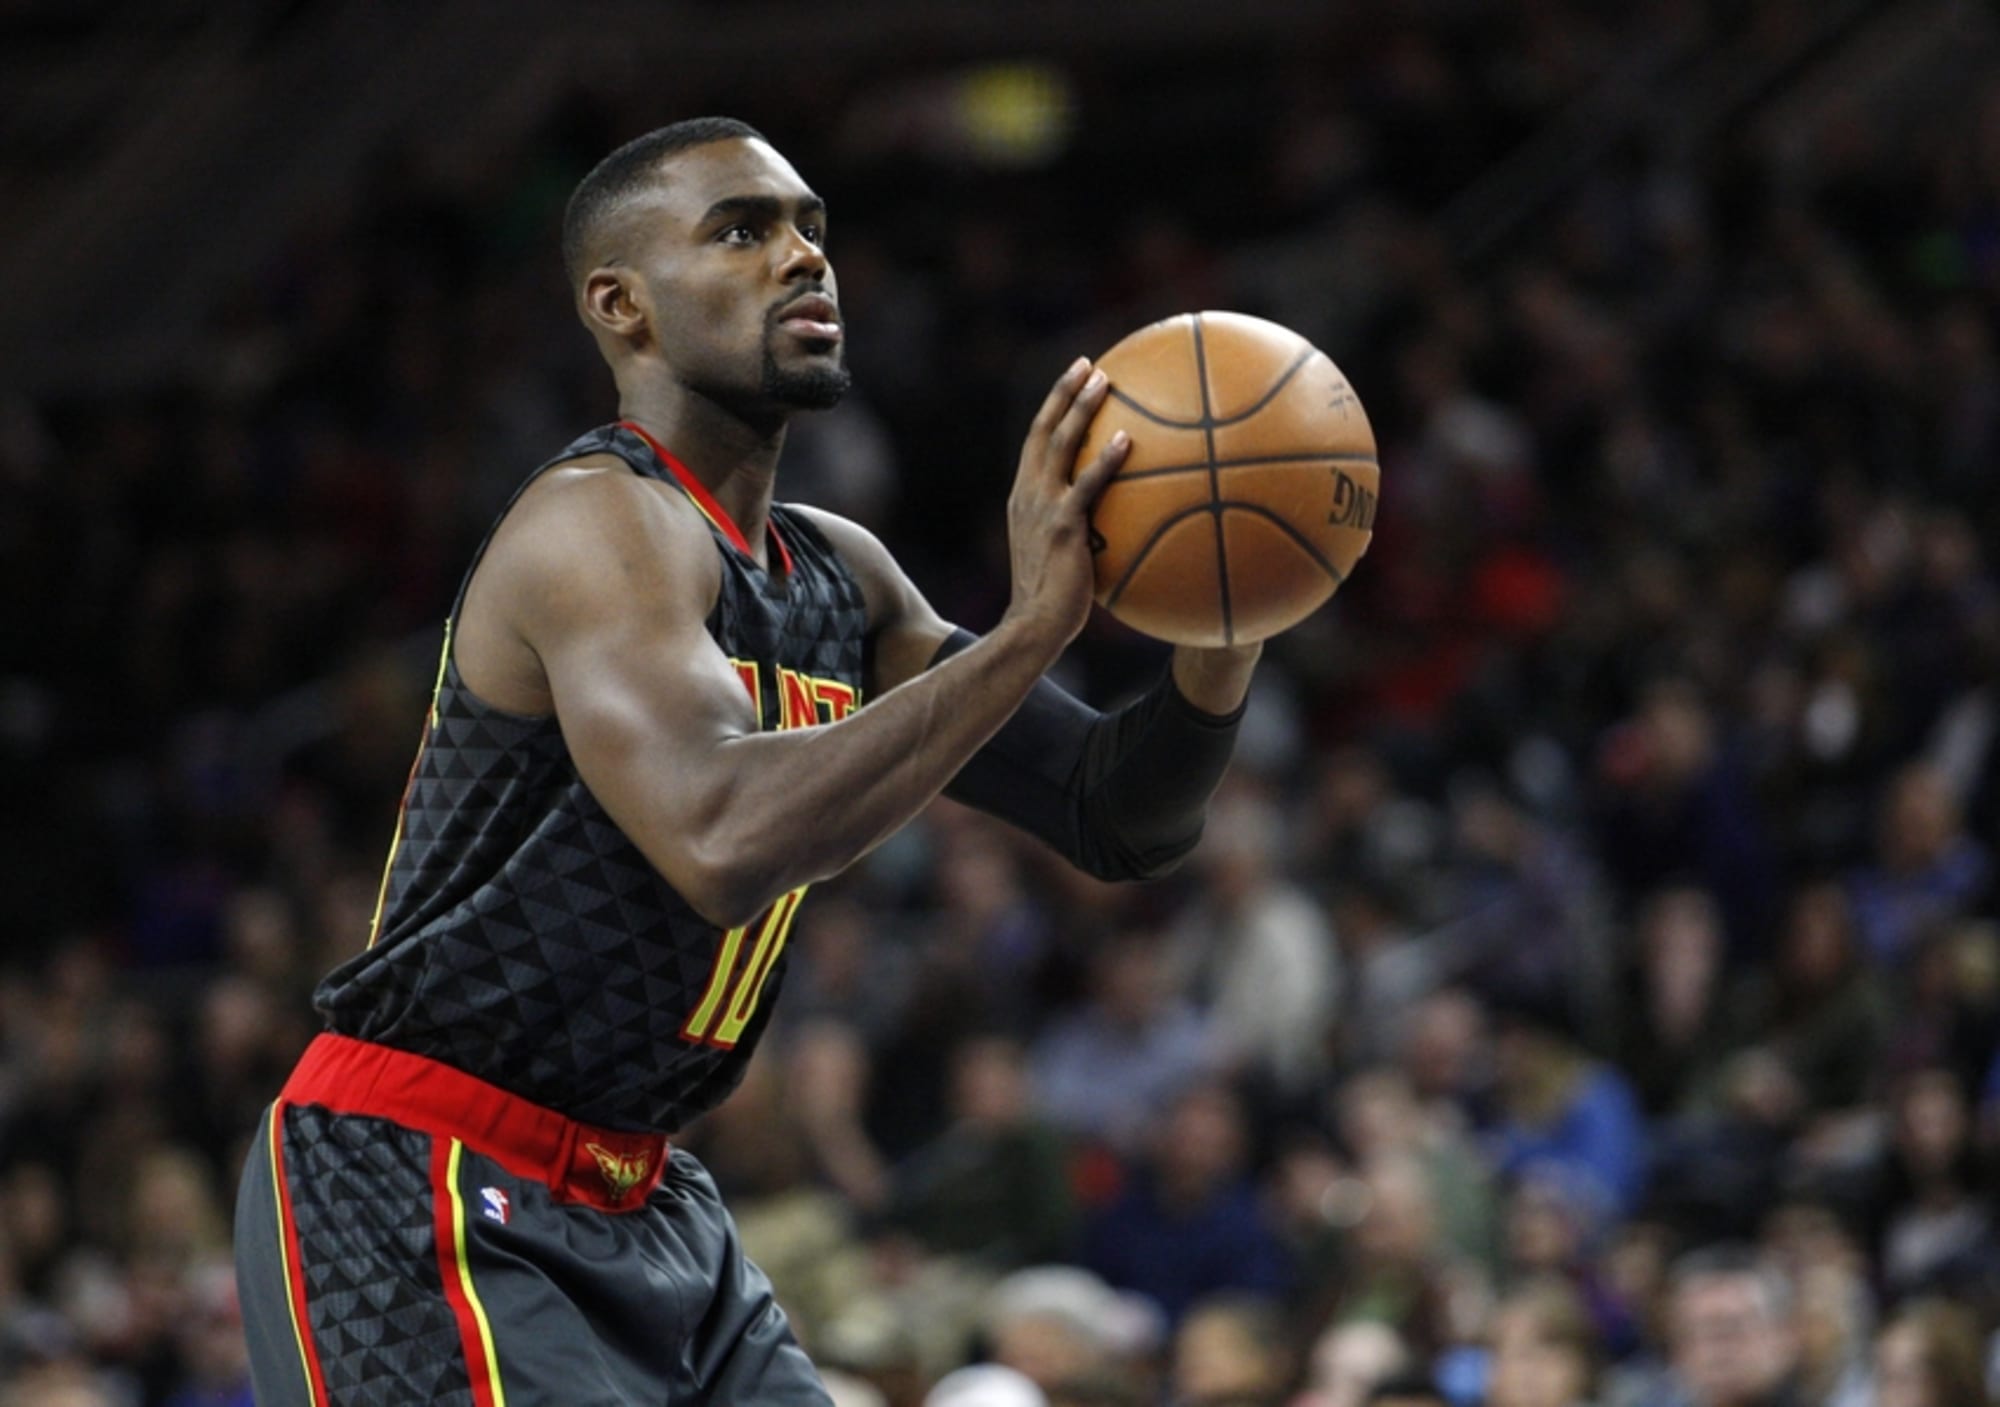 Should Coach Bud think about starting Tim Hardaway Jr. over Kyle